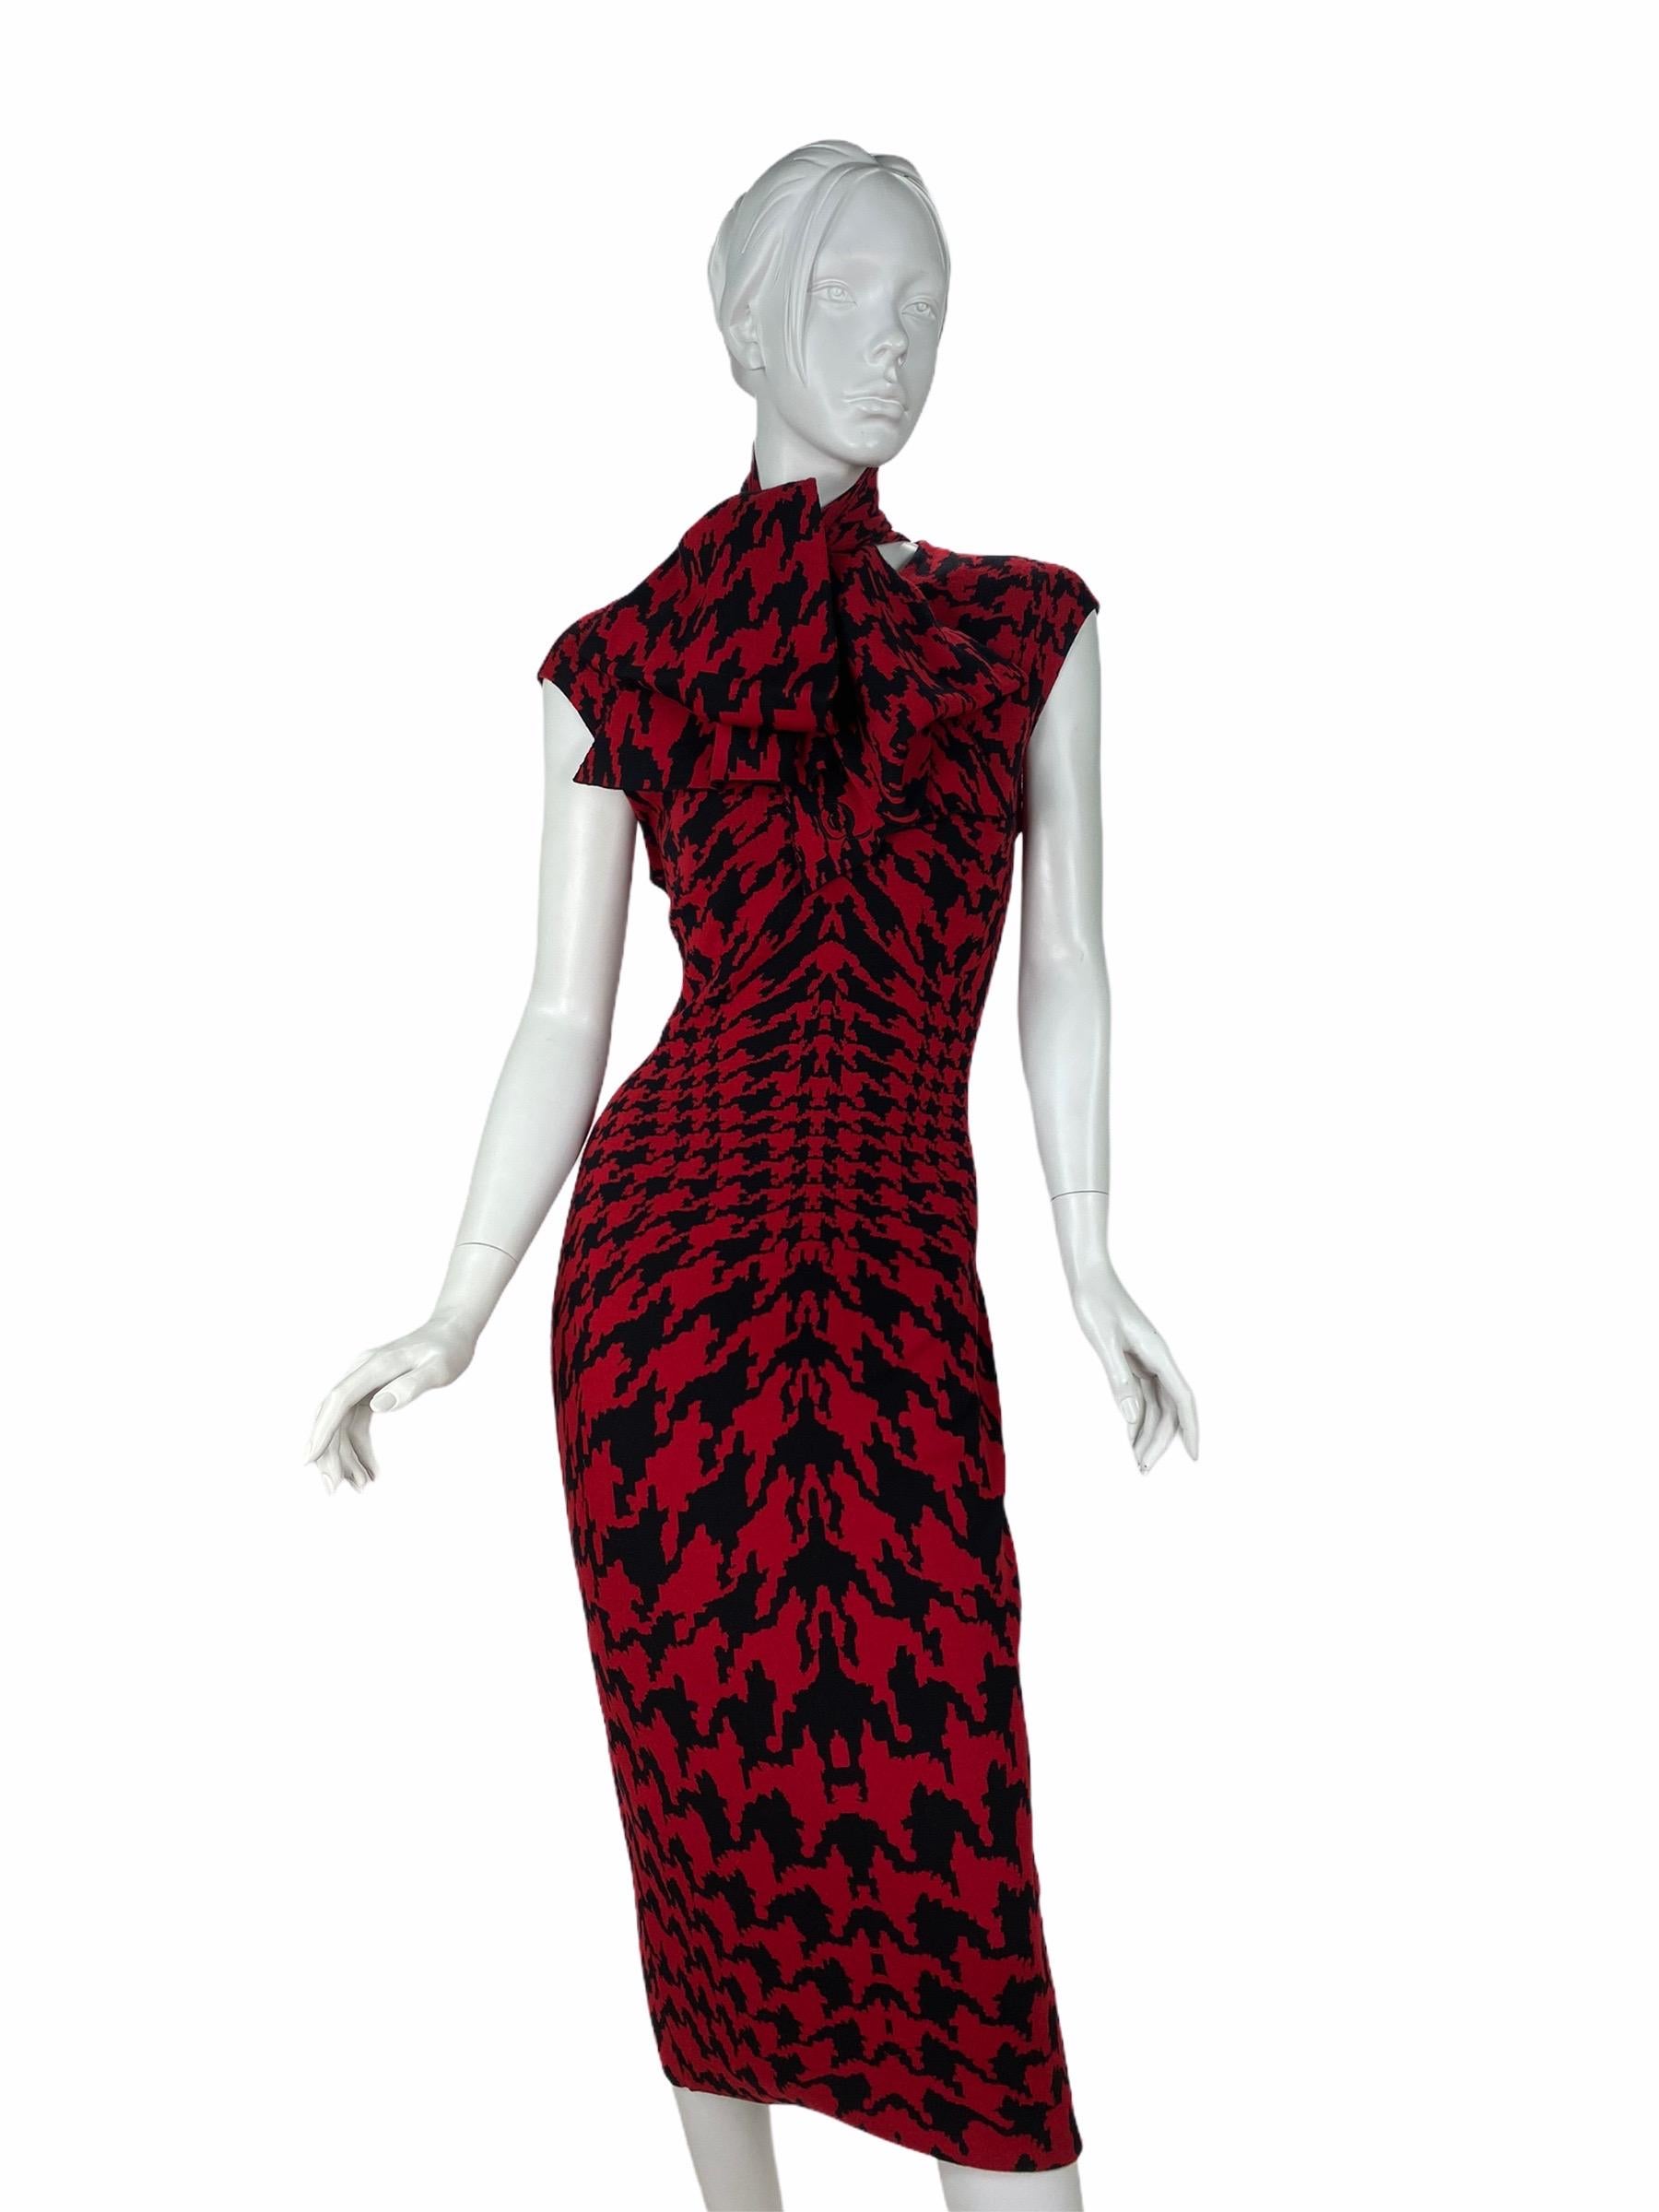 F/W 2009 Iconic Alexander Mcqueen houndstooth print knit dress at 